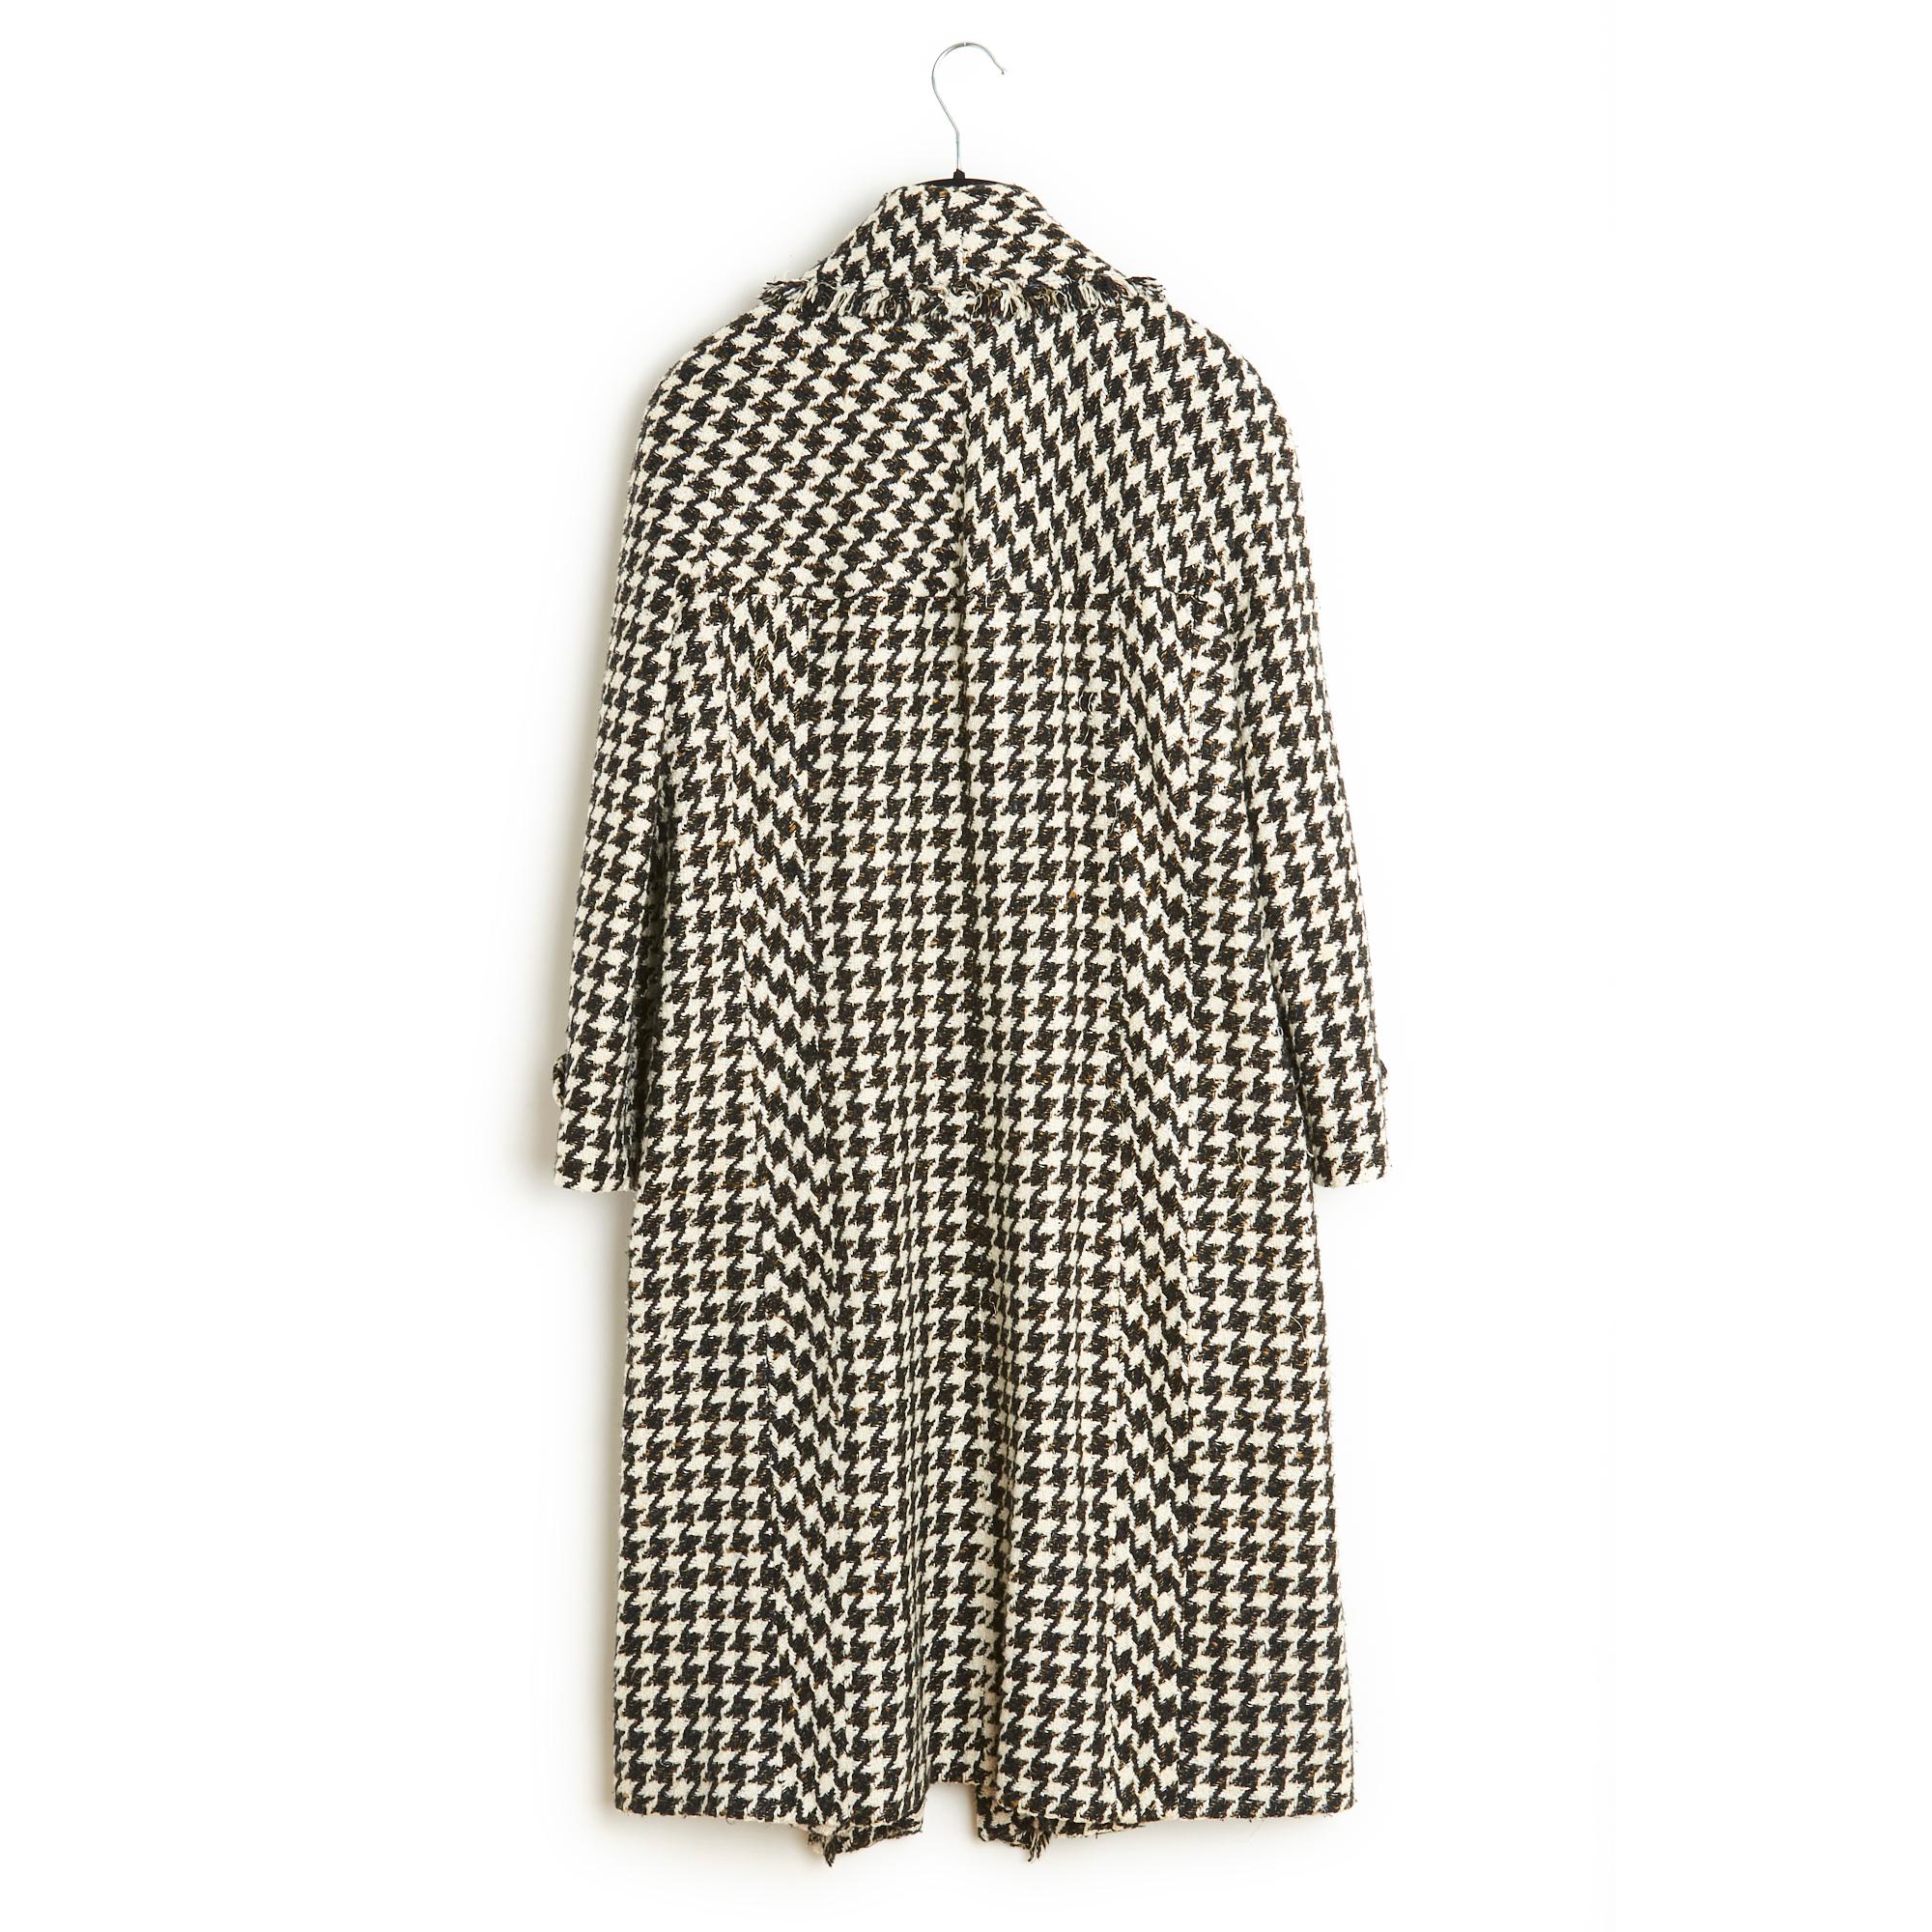 2006SS Chanel Black White Silk Tweed Coat FR38 For Sale 3